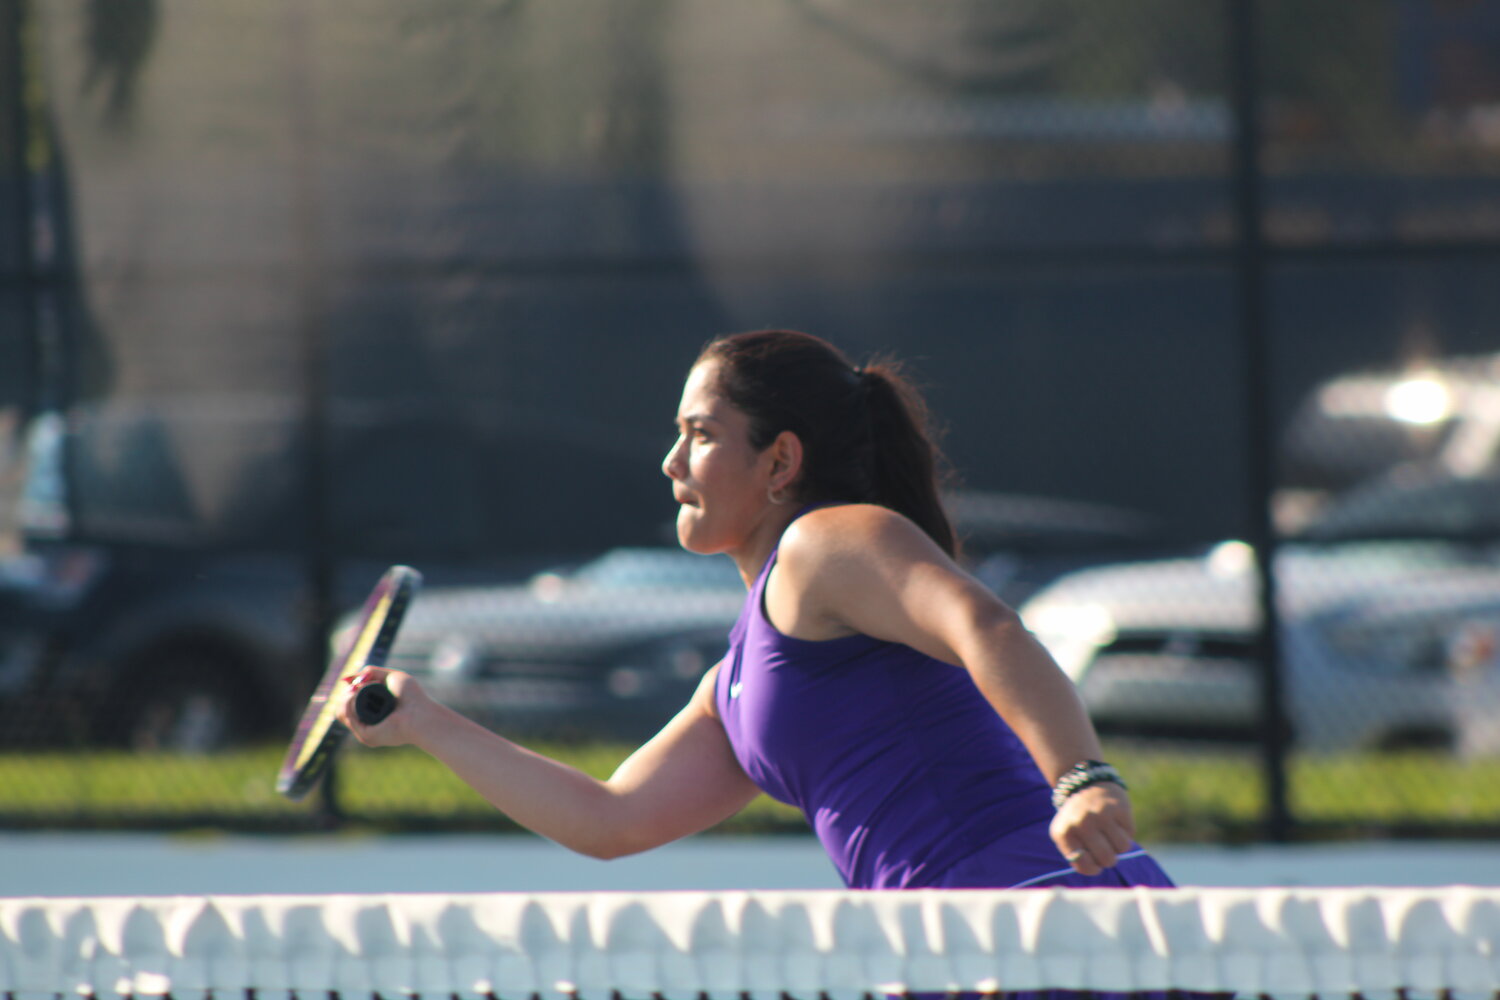 Marylee Muniz was 1/2 of the 1 doubles team for FC that battled in a 3 set loss.